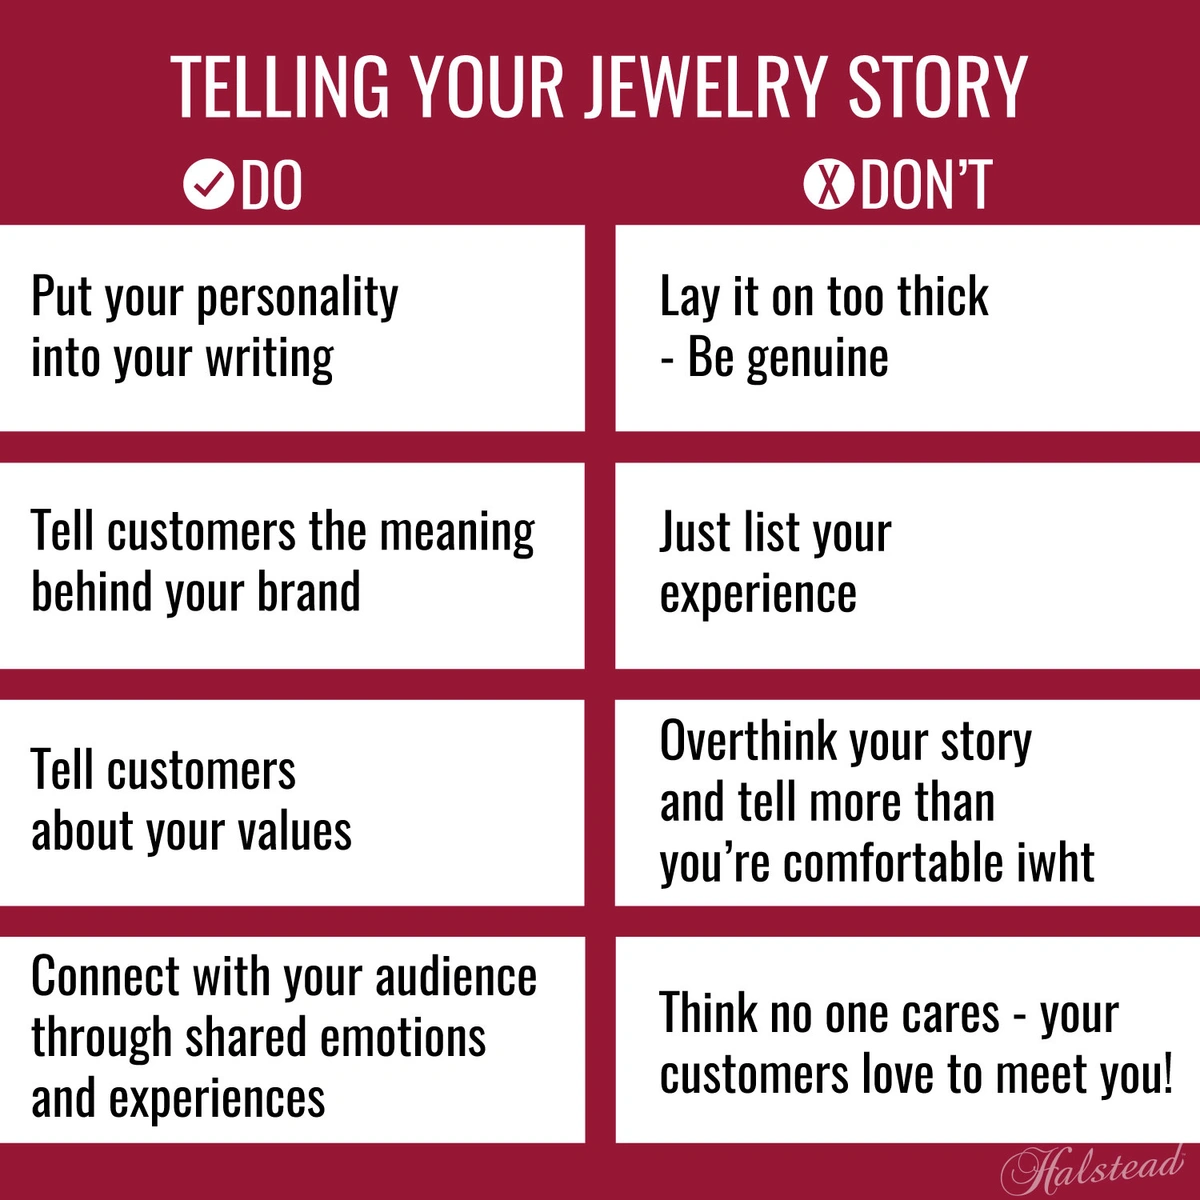 Telling your jewelry story - Do's and Don'ts